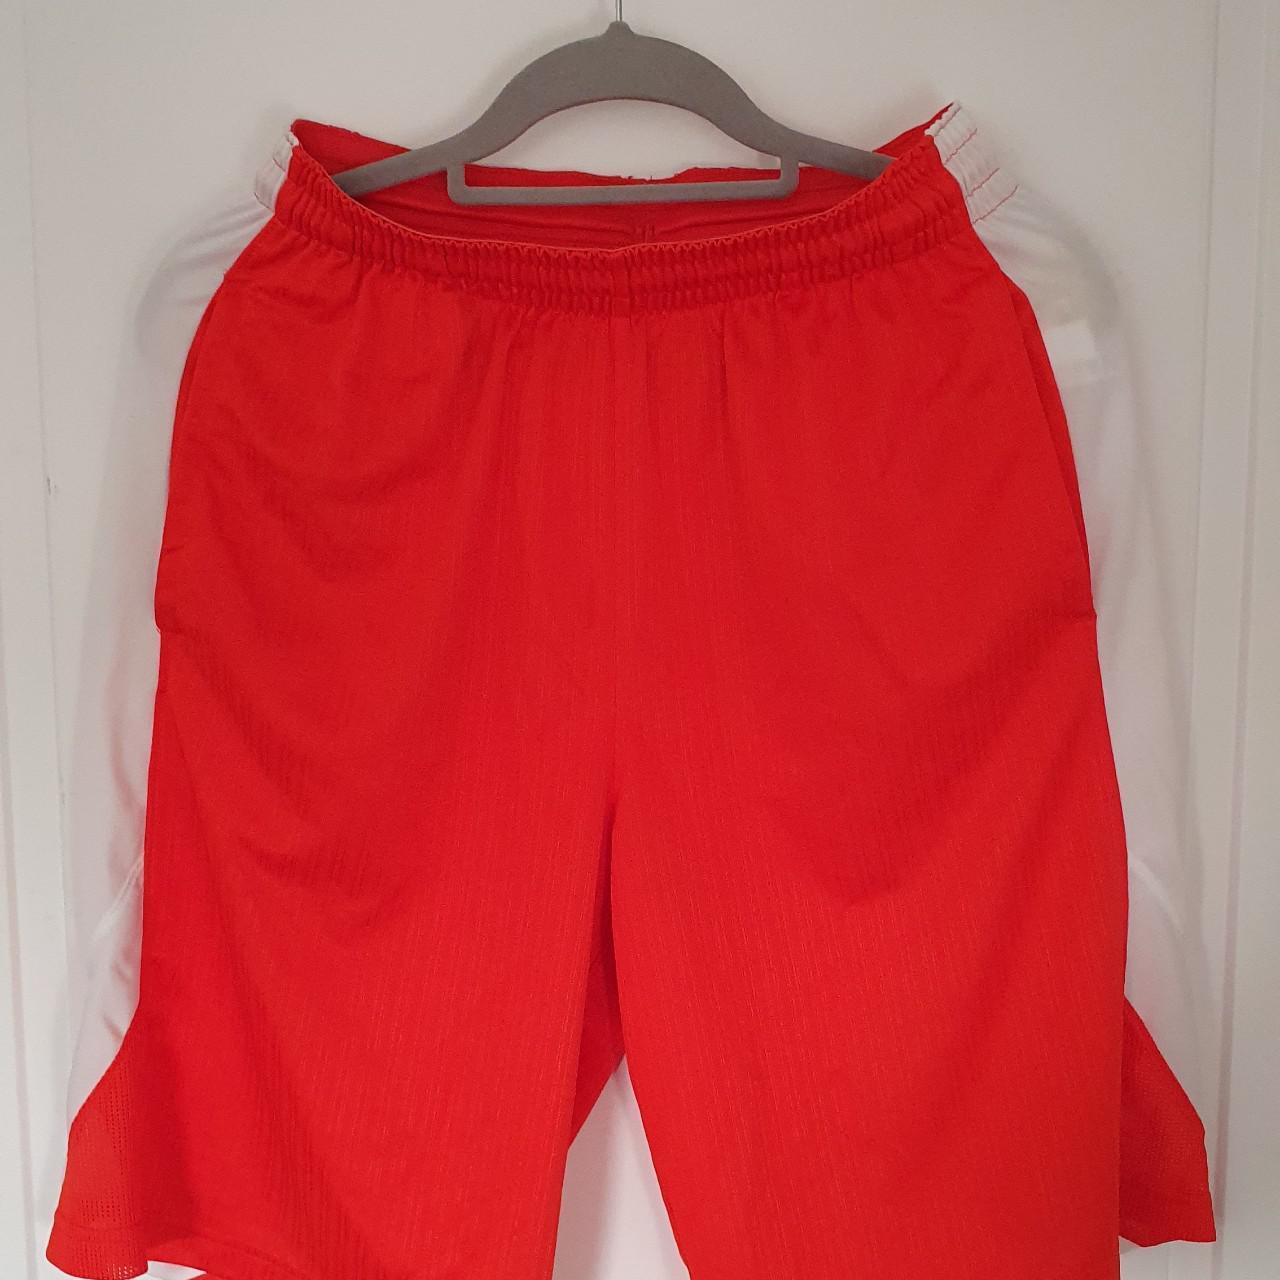 Product Image 1 - Nike brand basketball shorts in